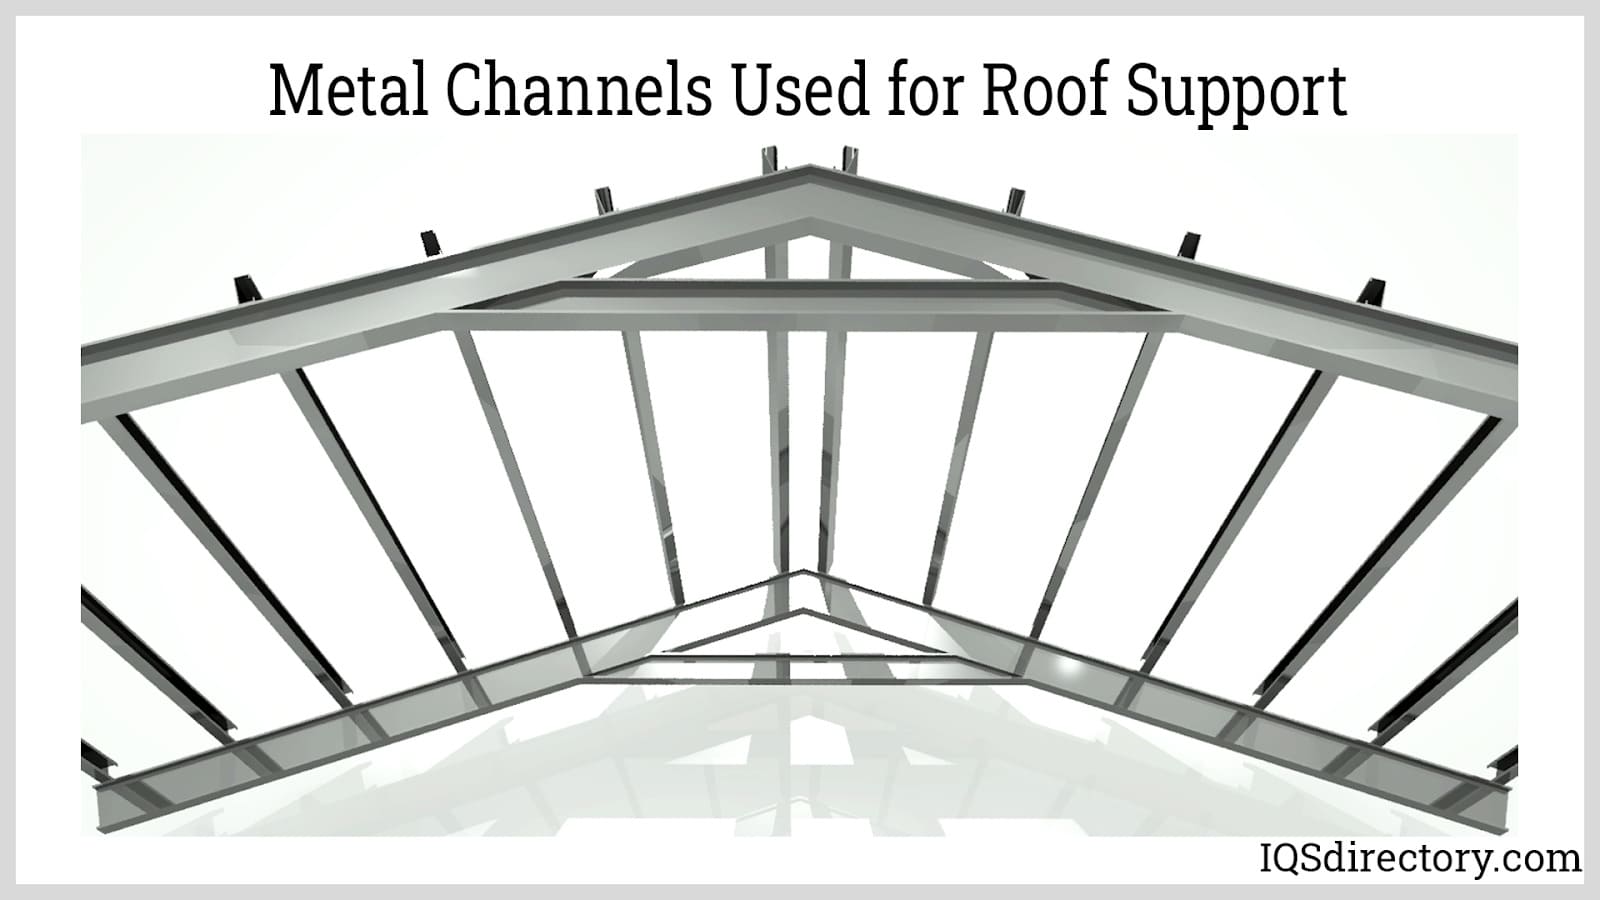 Metal Channel Used for Roof Support